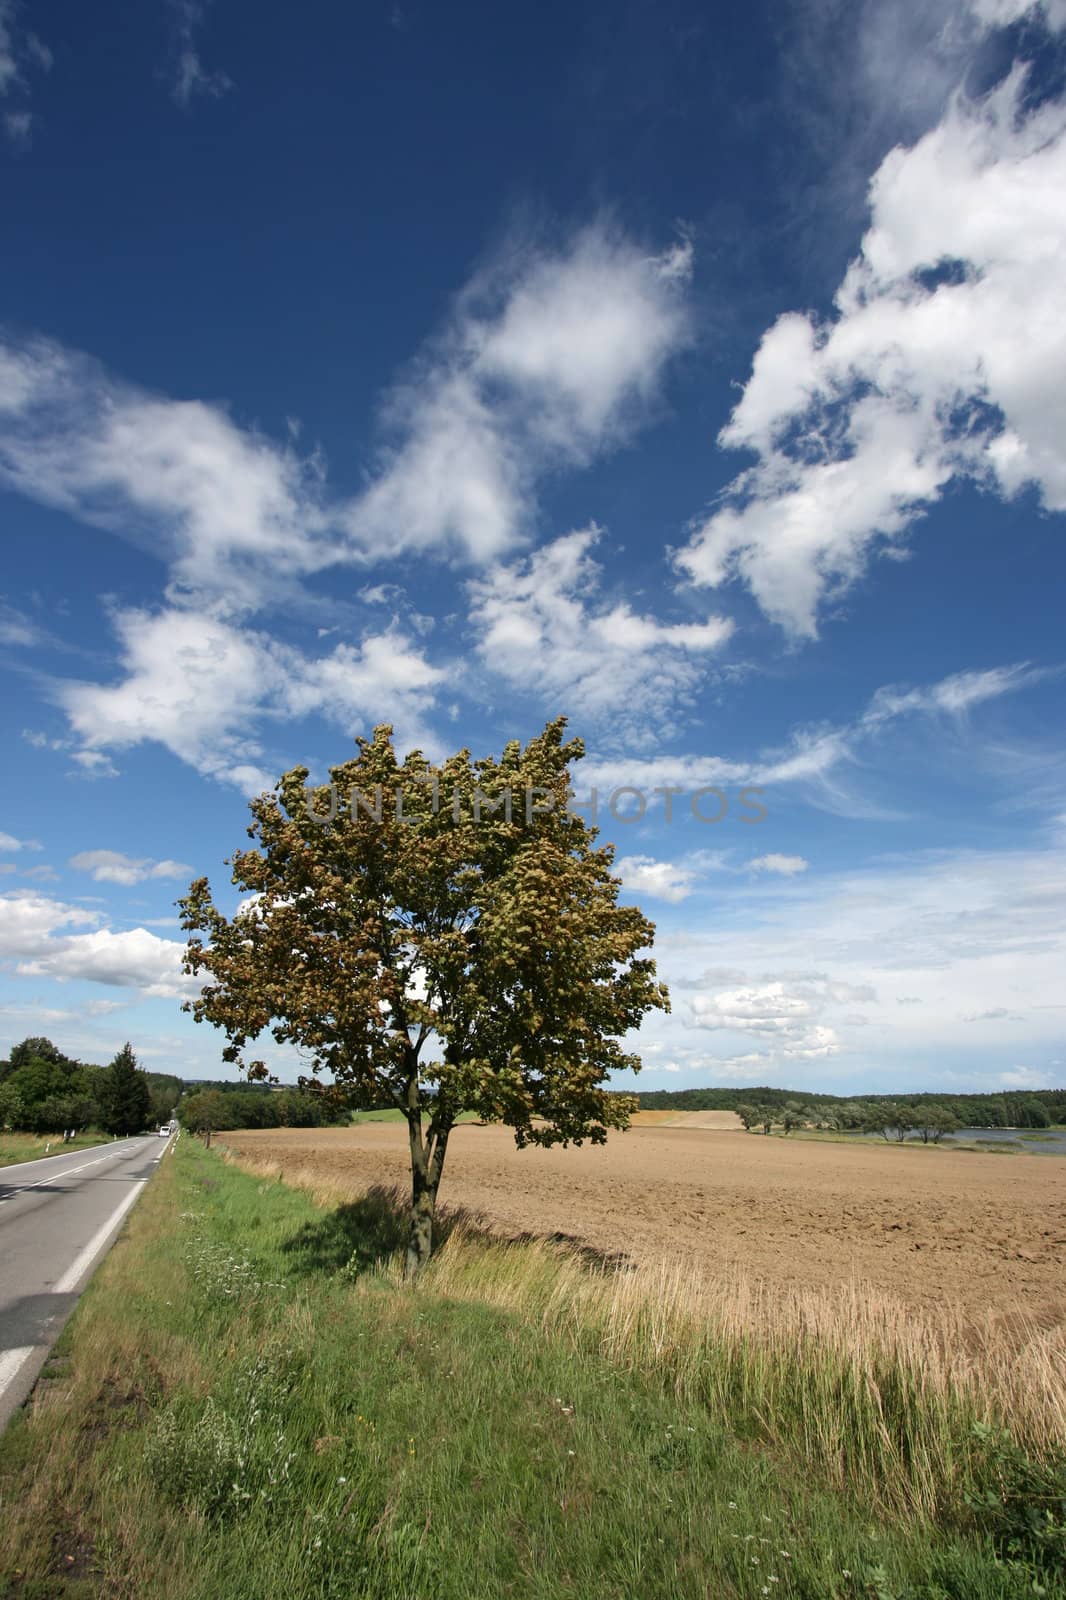 Czech Republic countryside. Summertime weather, blue sky and white clouds. South Bohemian region.